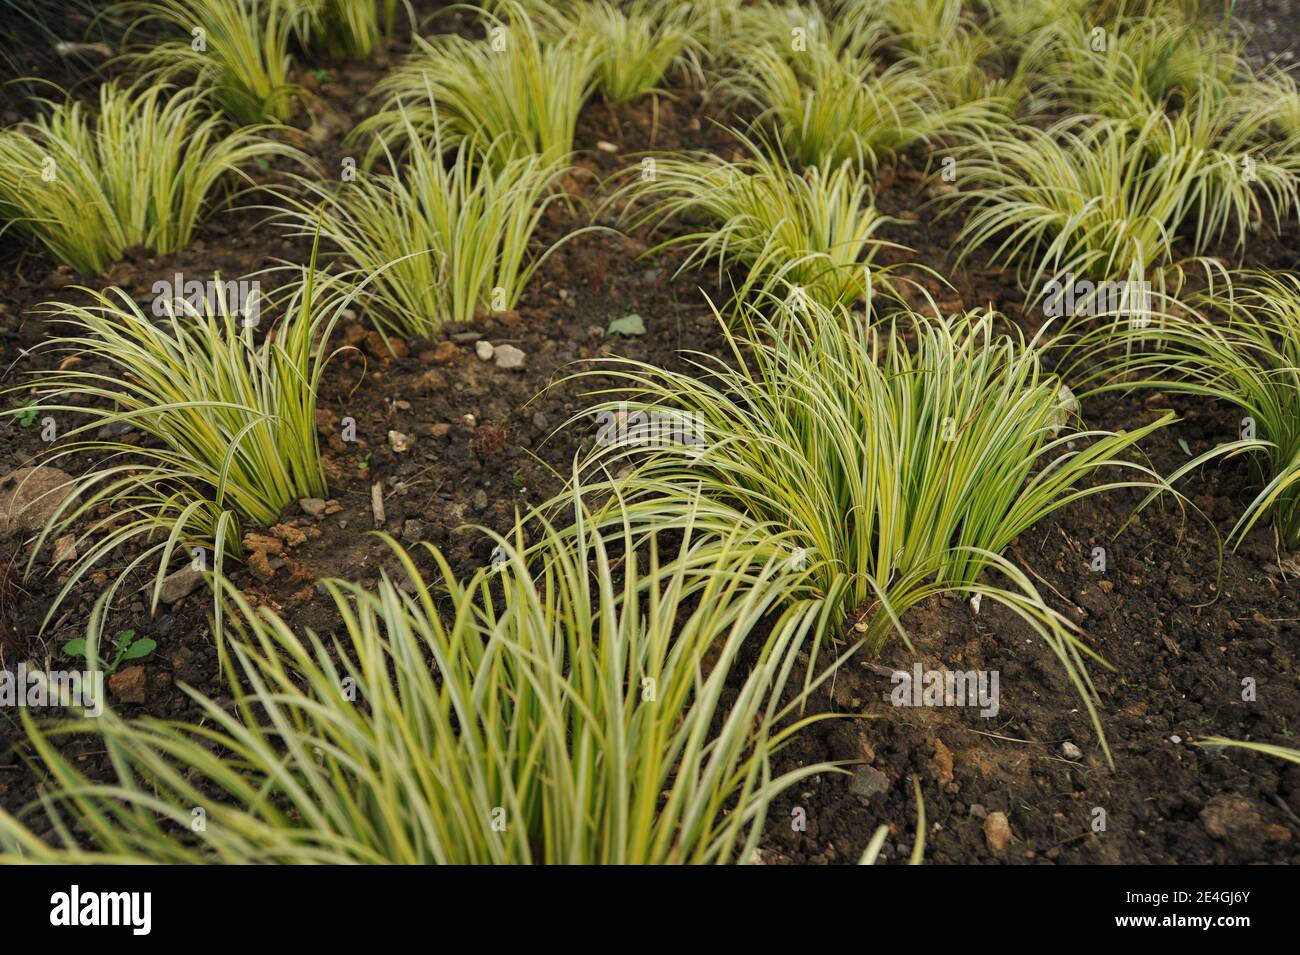 Variegated slender sweet flag (Acorus gramineus Variegatus) with narrow leaves margined with creamy-yellow in a ground cover planting in a garden Stock Photo